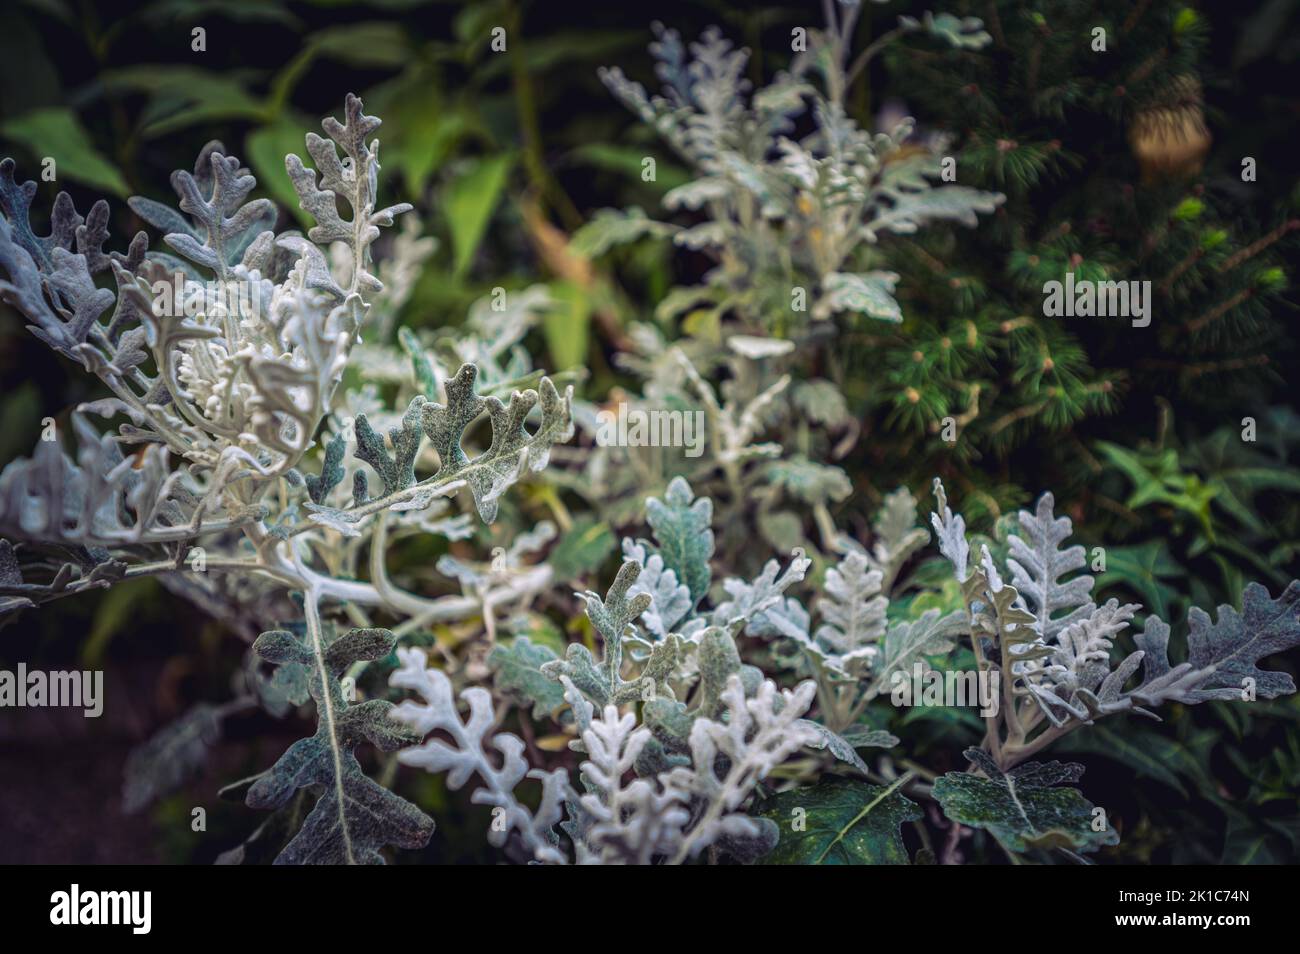 A silver tree wormwood (Artemisia Arborescens) growing in the garden in summer, Halle Saale, Saxony-Anhalt, Germany Stock Photo